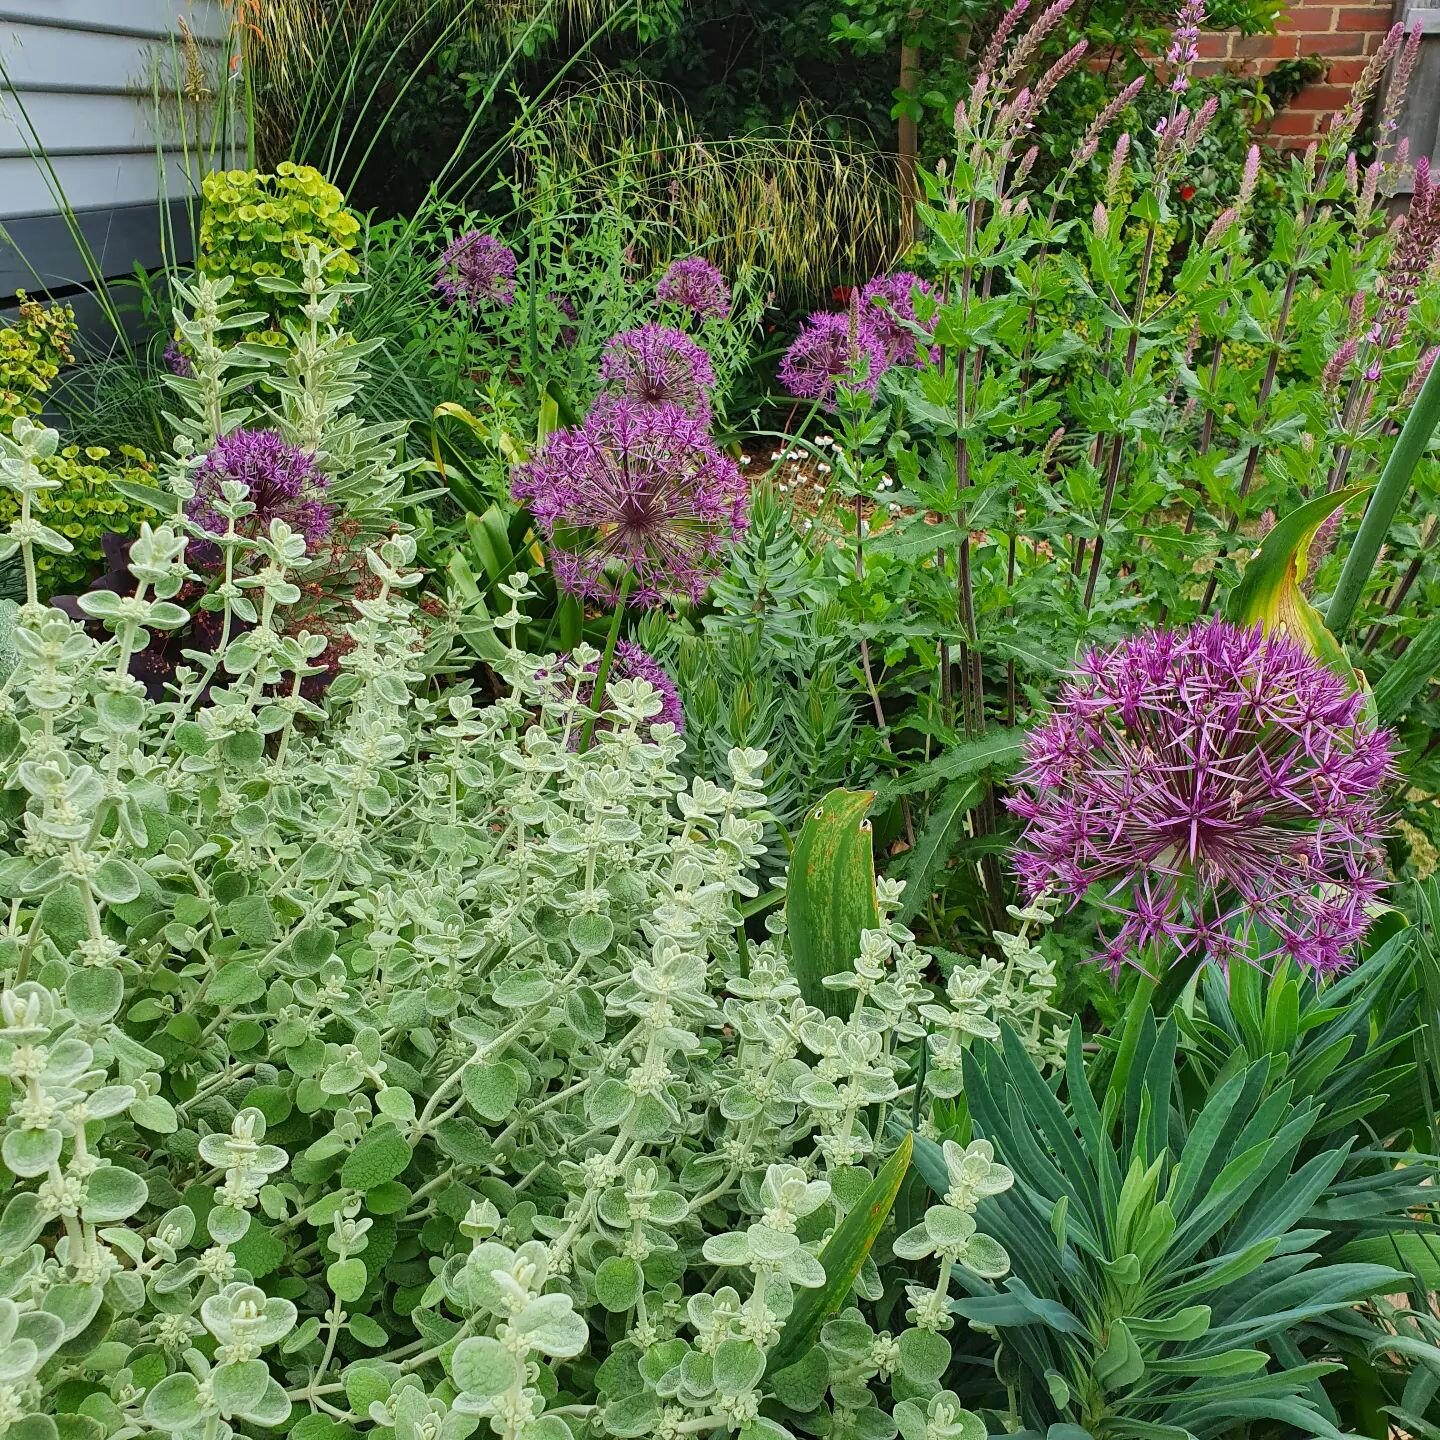 Fireworks in my garden this morning. This is the garden I play in, and get to collect and experiment. First year with the Alliums. I'll be curious to see how they come back next year. This west facing garden in Bayside isn't on irrigation. I'm trying